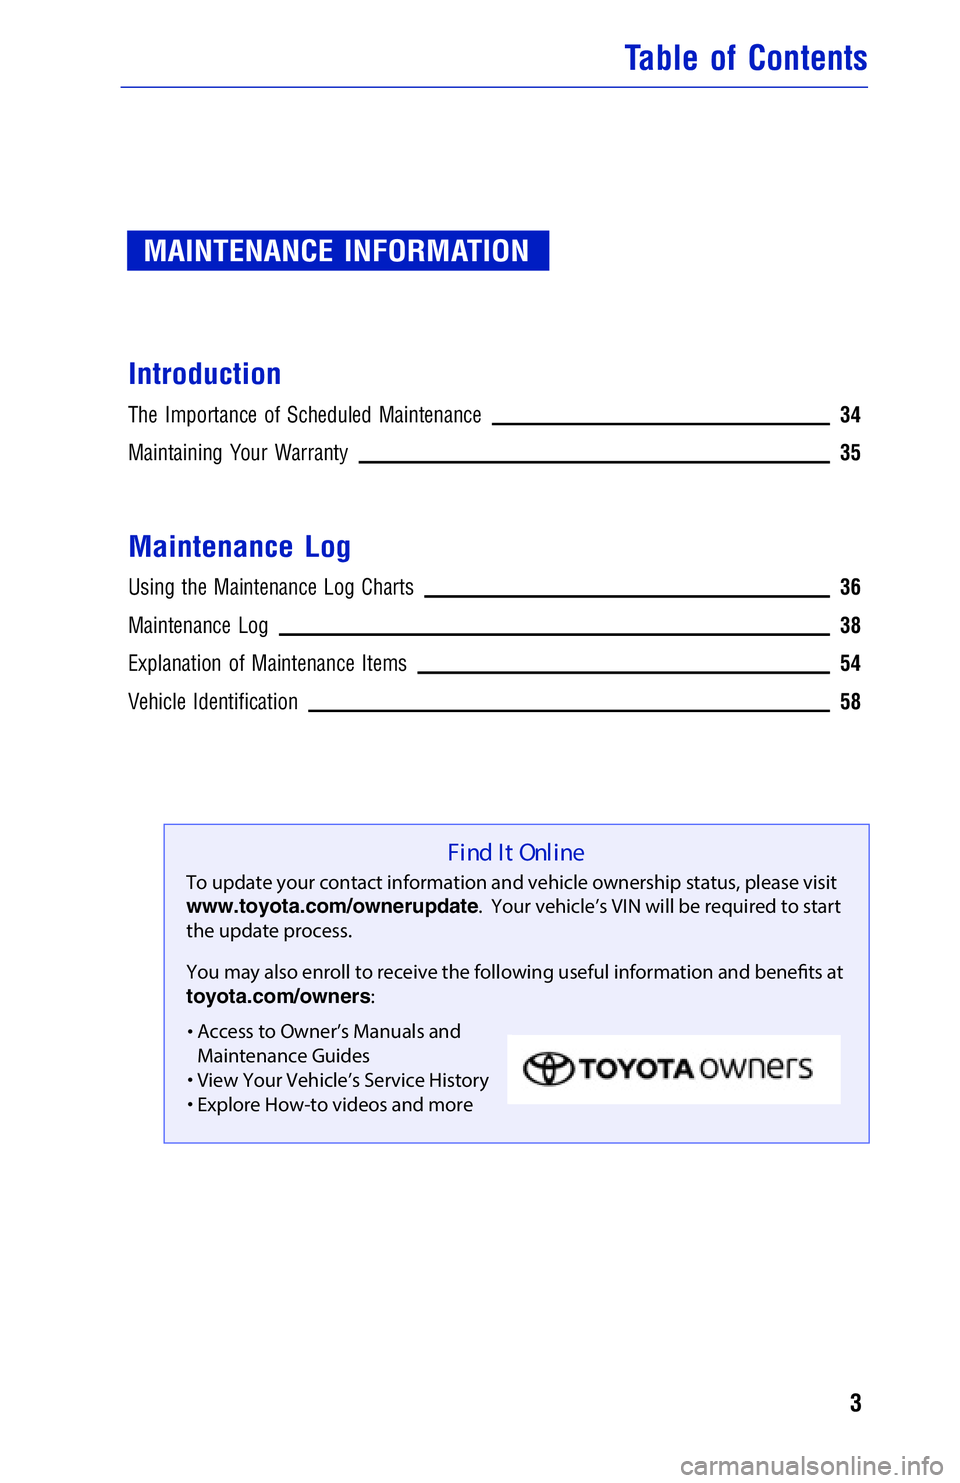 TOYOTA SIENNA 2018  Warranties & Maintenance Guides (in English) JOBNAME: 2878023-en-2018_Sien PAGE: 3 SESS: 4 OUTPUT: Mon Oct 2 15:08:00 2017
/InfoShareAuthorCODA/InfoShareAuthorCODA/TS_Warr_Maint/2878023-en-2018_S\
ienna.00505-18WMG-SIE_vX/TS_Warr_Maint_v1
MAINTE